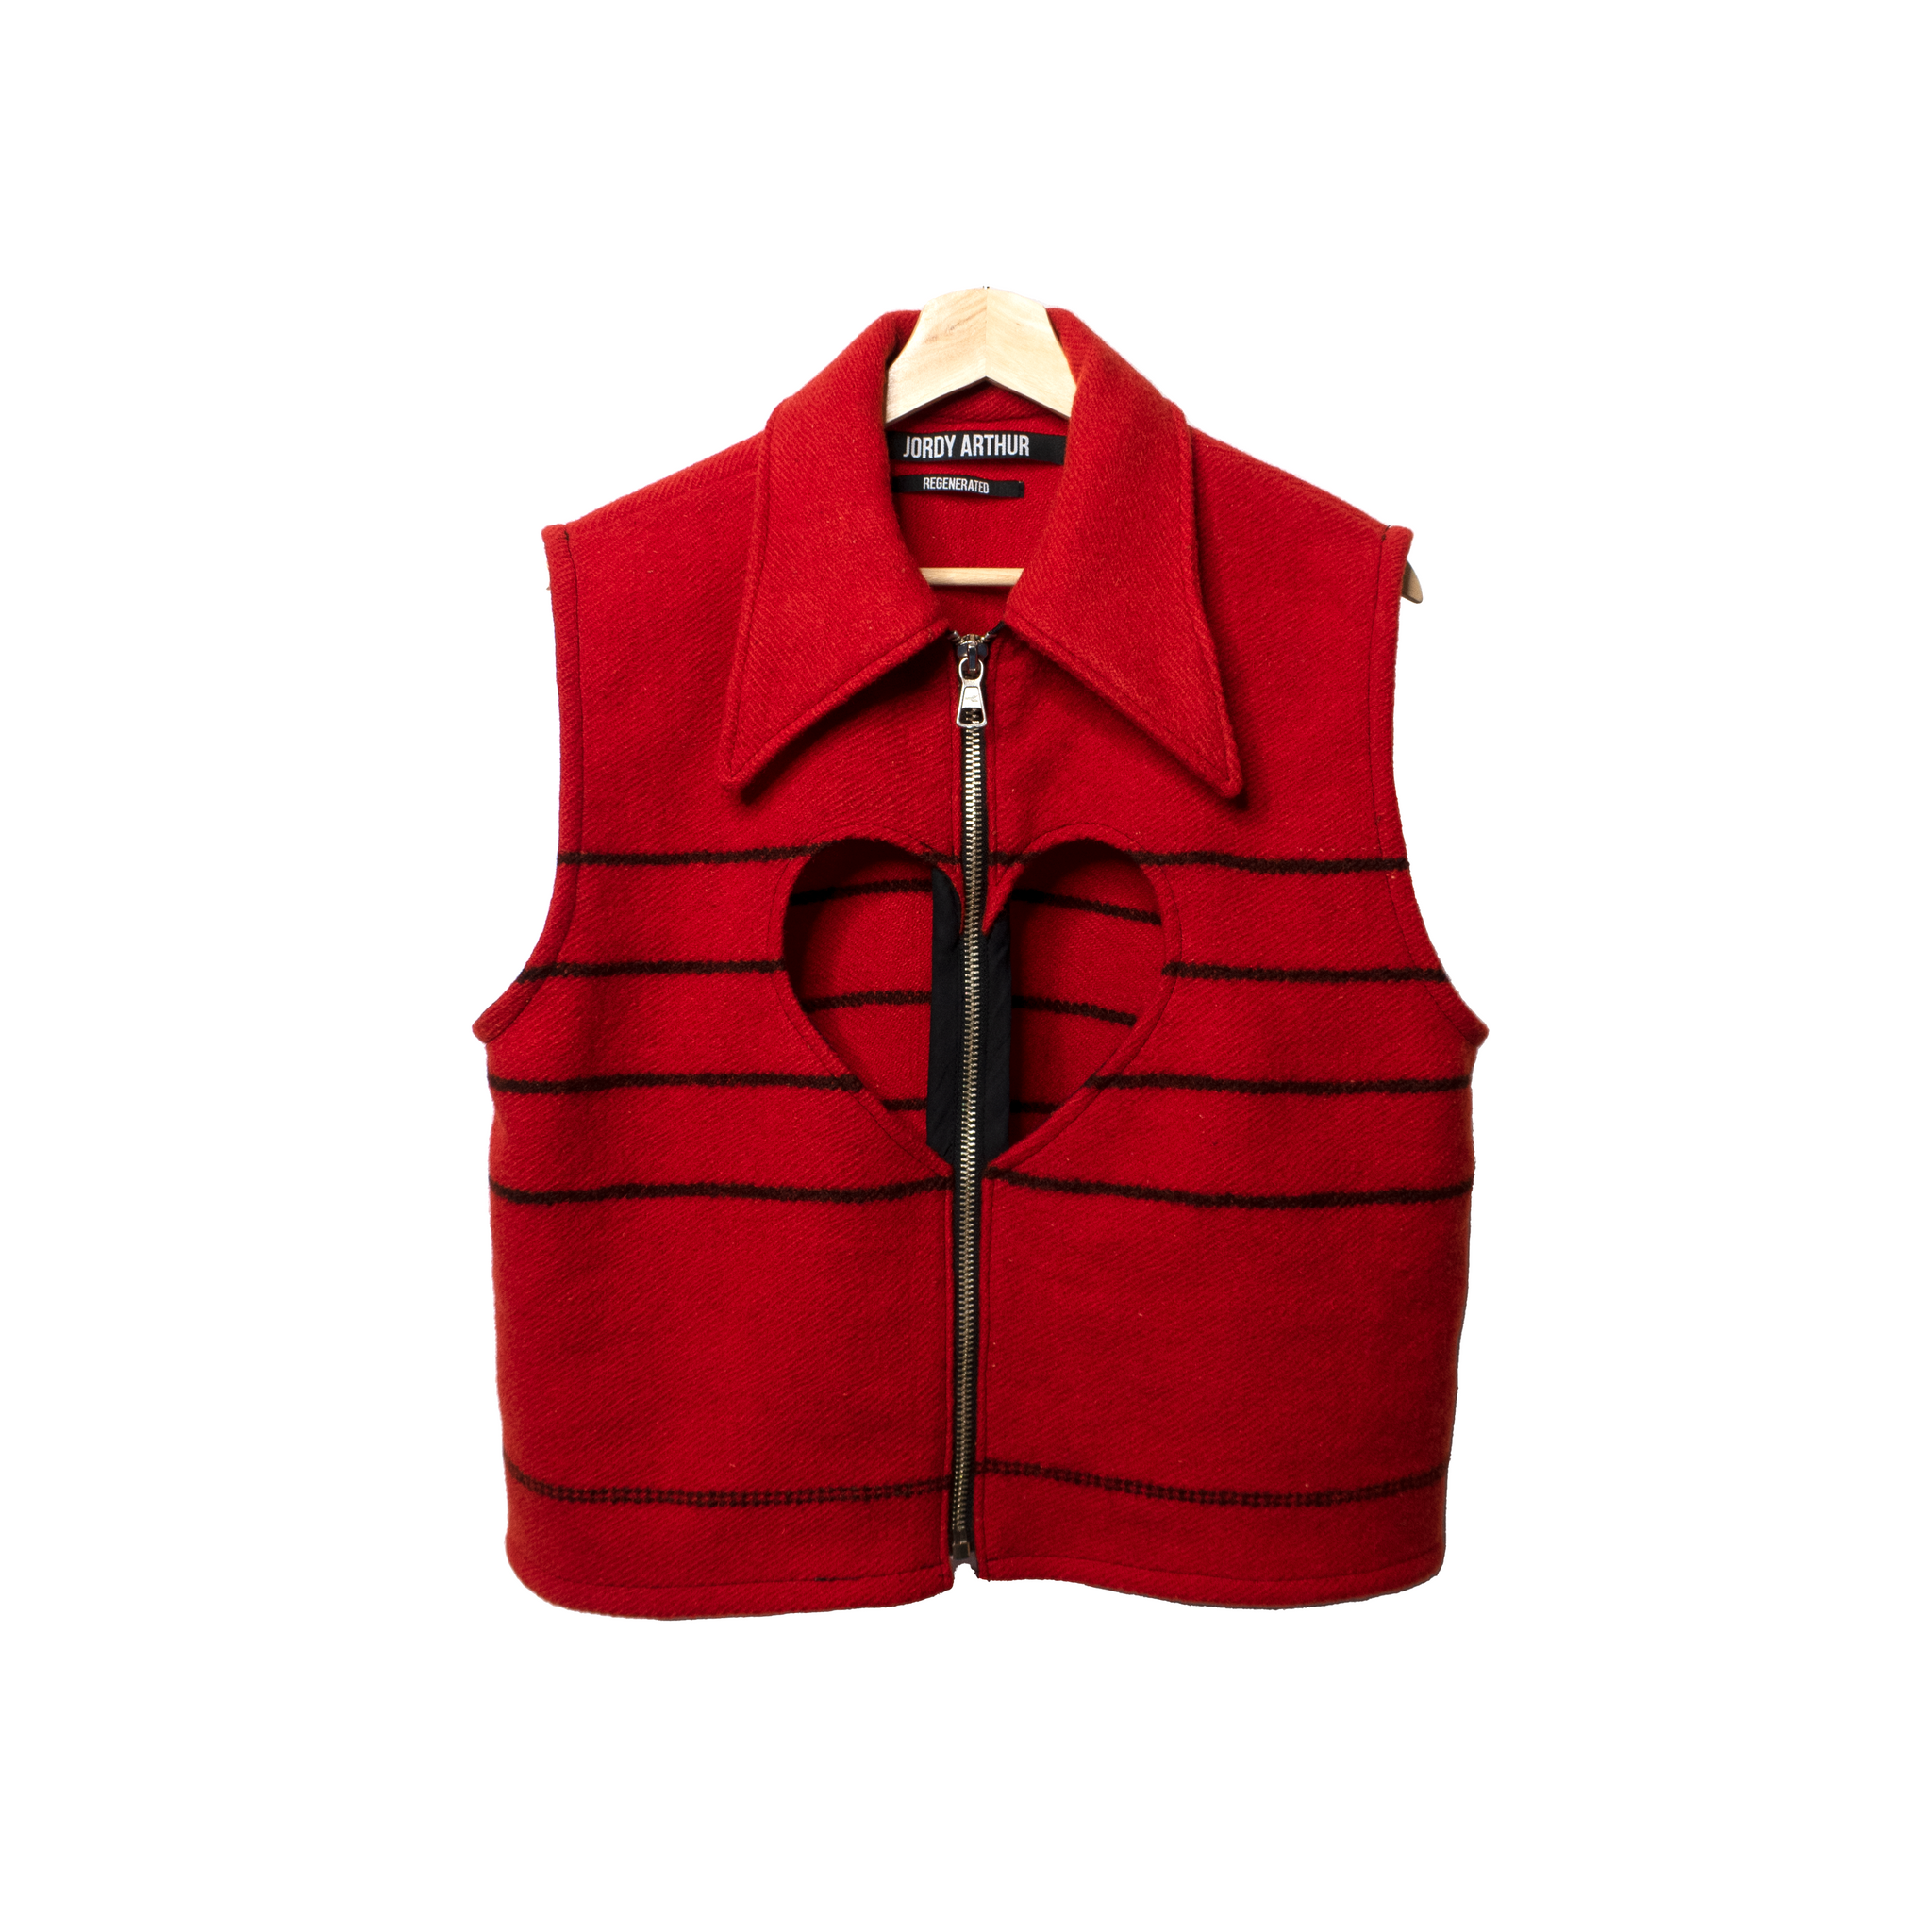 Regenerated cut out blanket vest, red